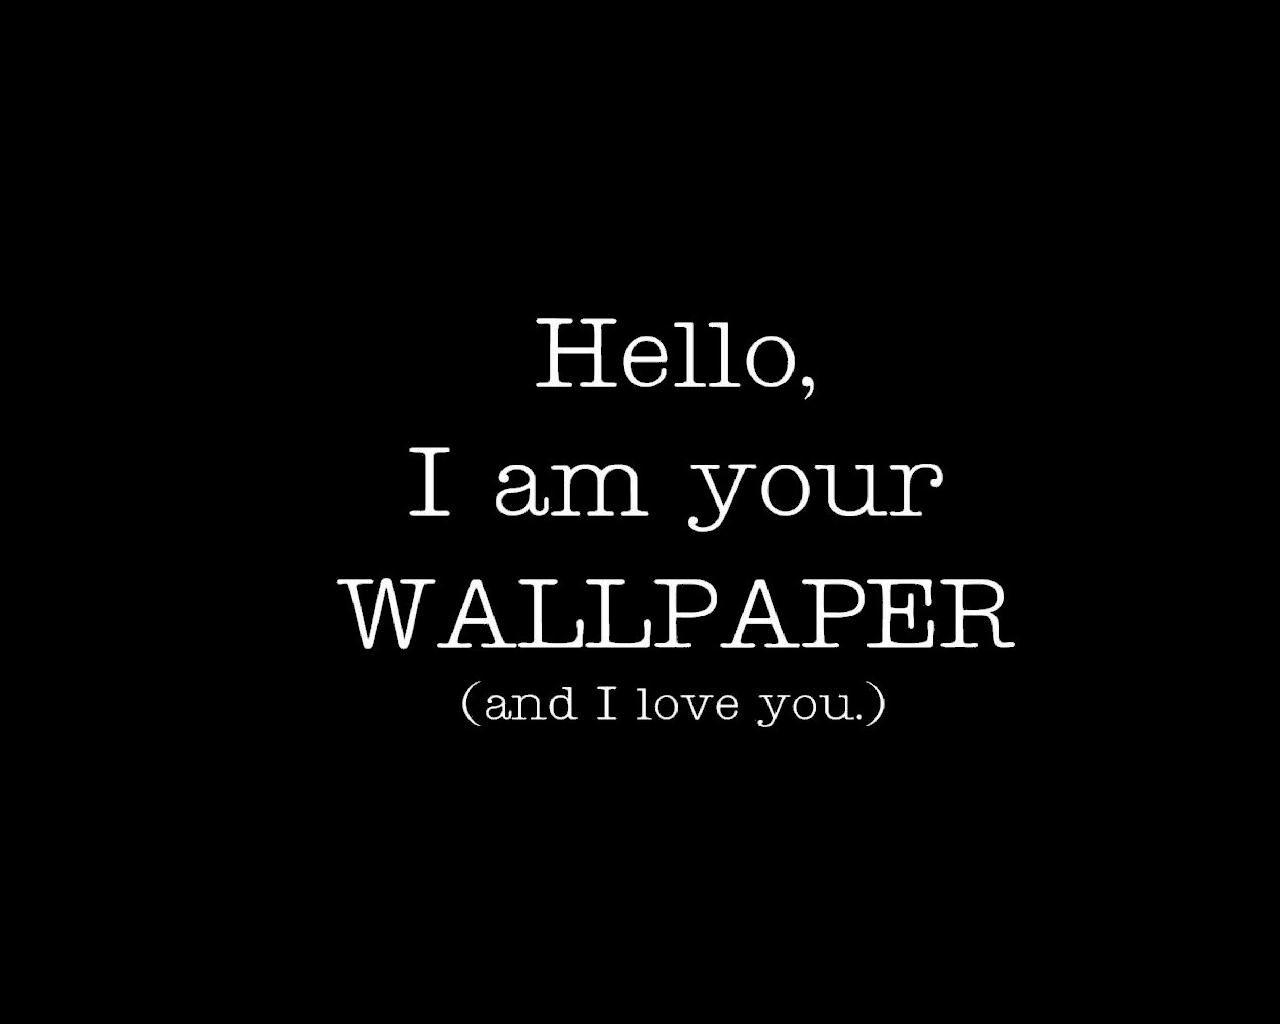 Witty Gallery of Wallpaper. Free Download For Android, Desktop